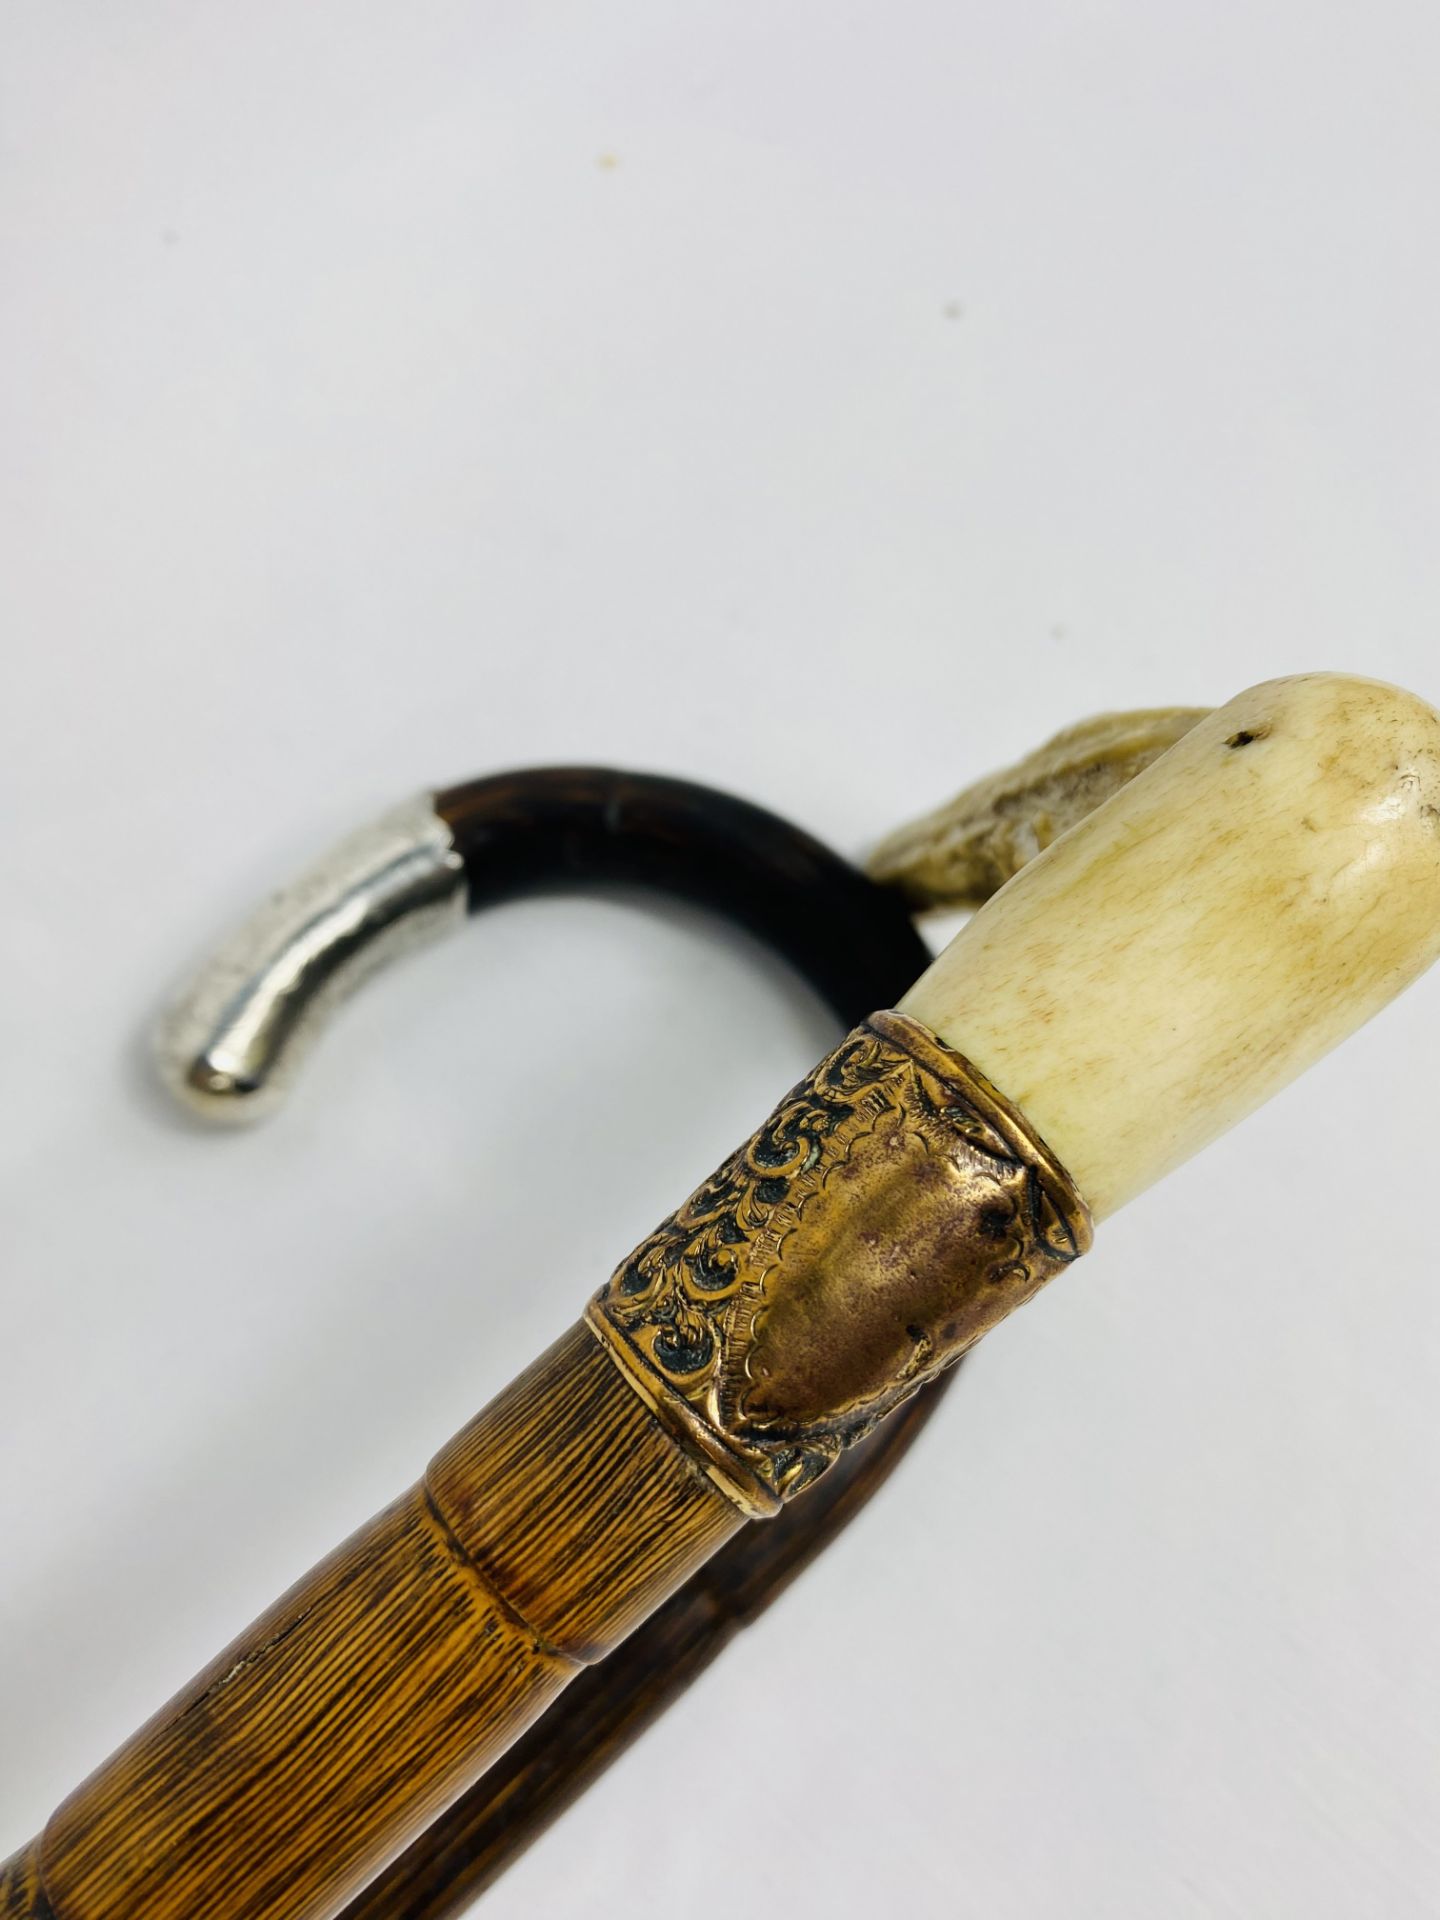 Silver tipped cane together with a cane with yellow metal ferrule - Image 4 of 4